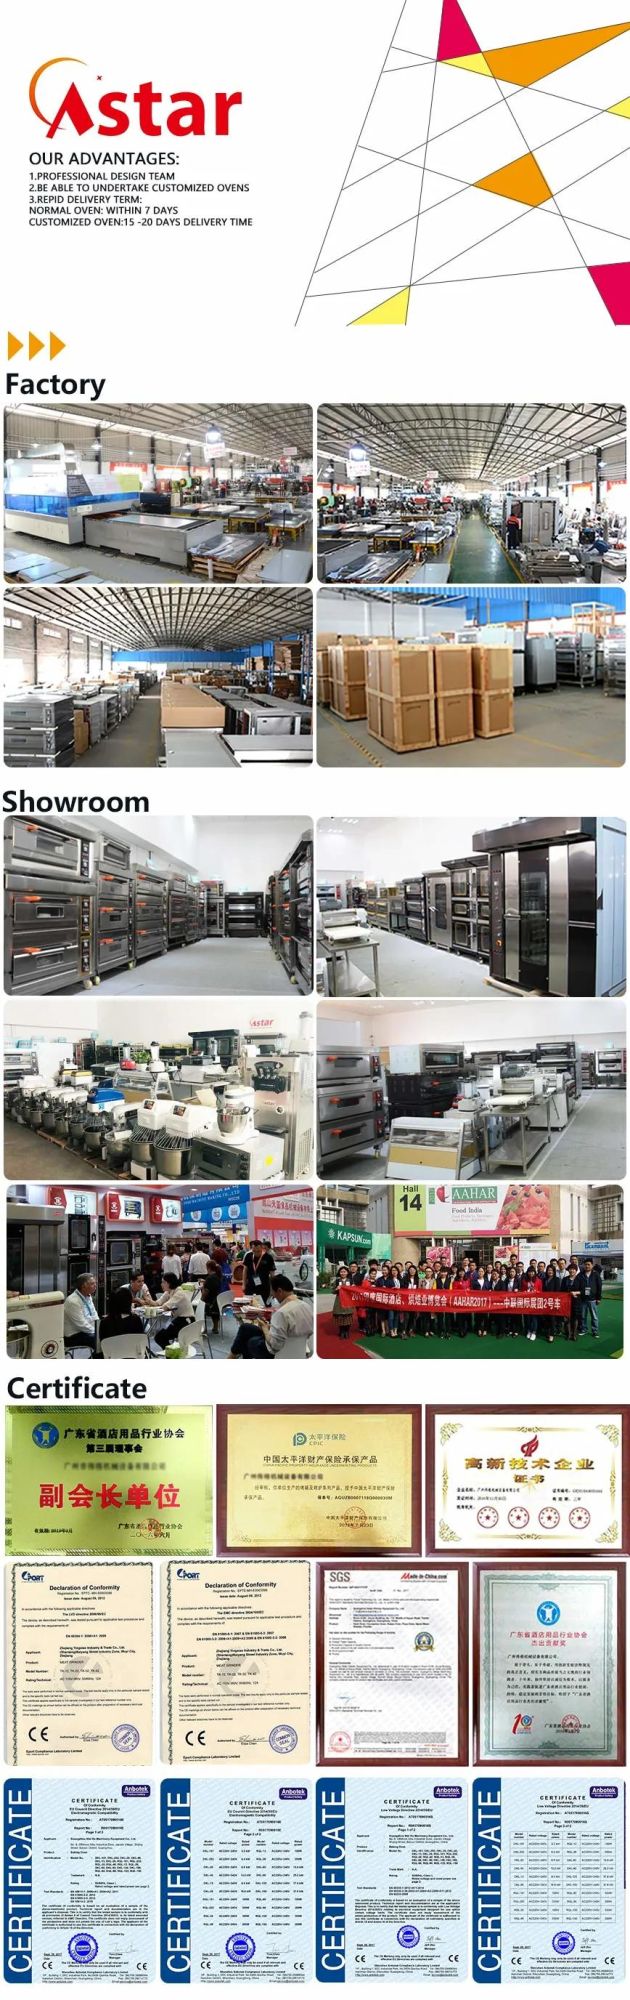 Commercial Bakery Equipment Industrial Cake Bread Baking Oven Rotary Oven Convection Oven Pizza Oven Tunnel Oven Pizza Baking Cake Oven